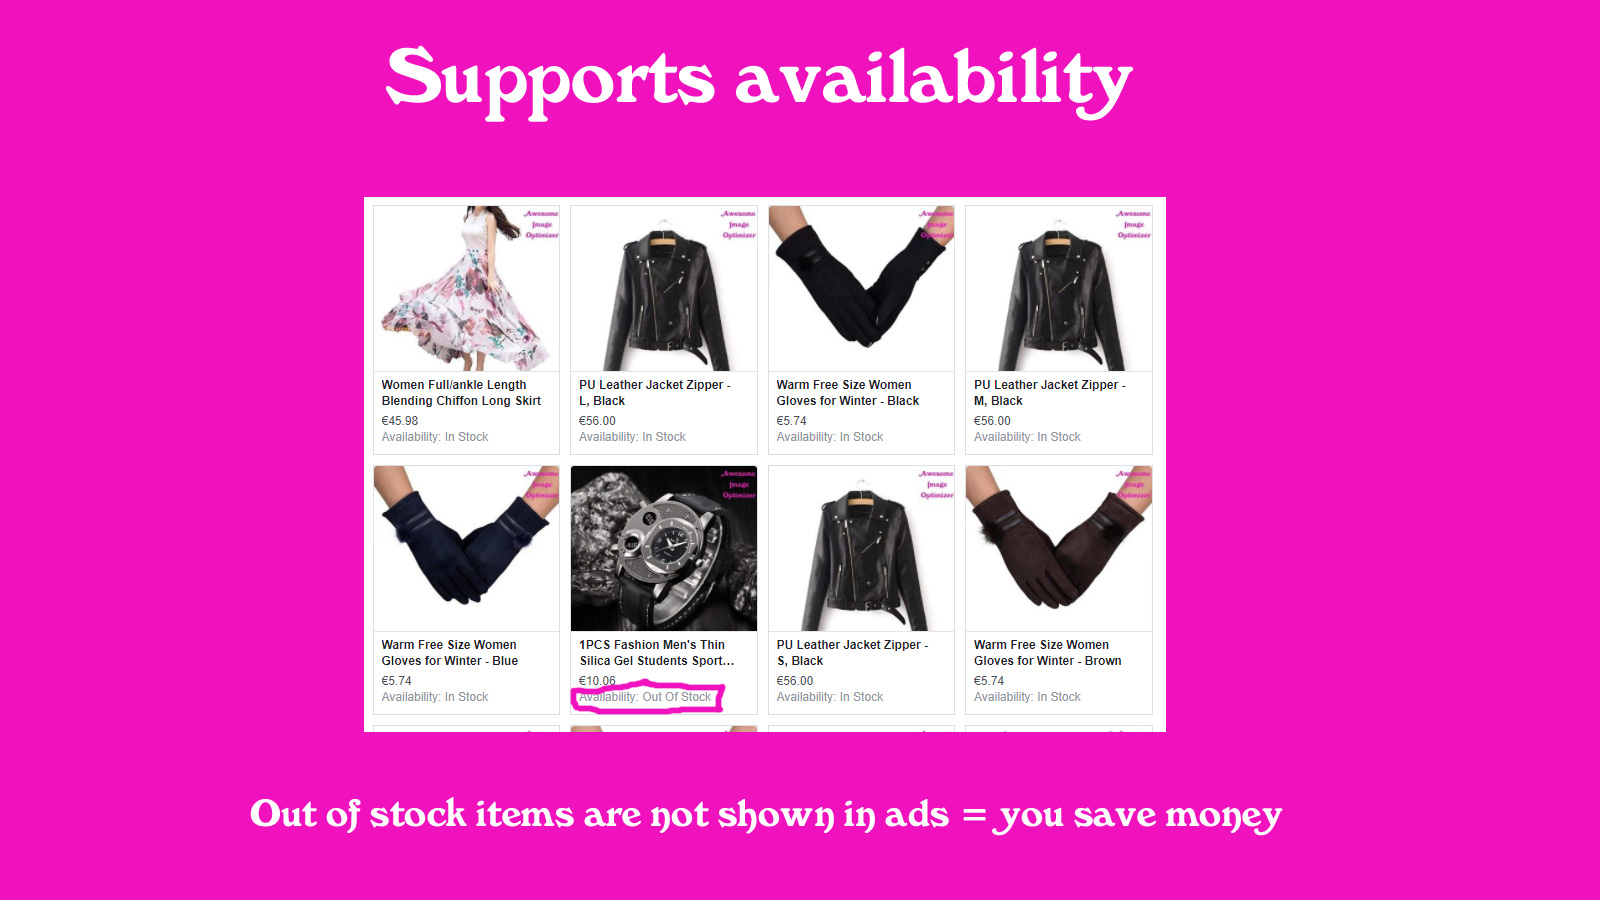 Supports availability - out of stock items are not shown means you save money